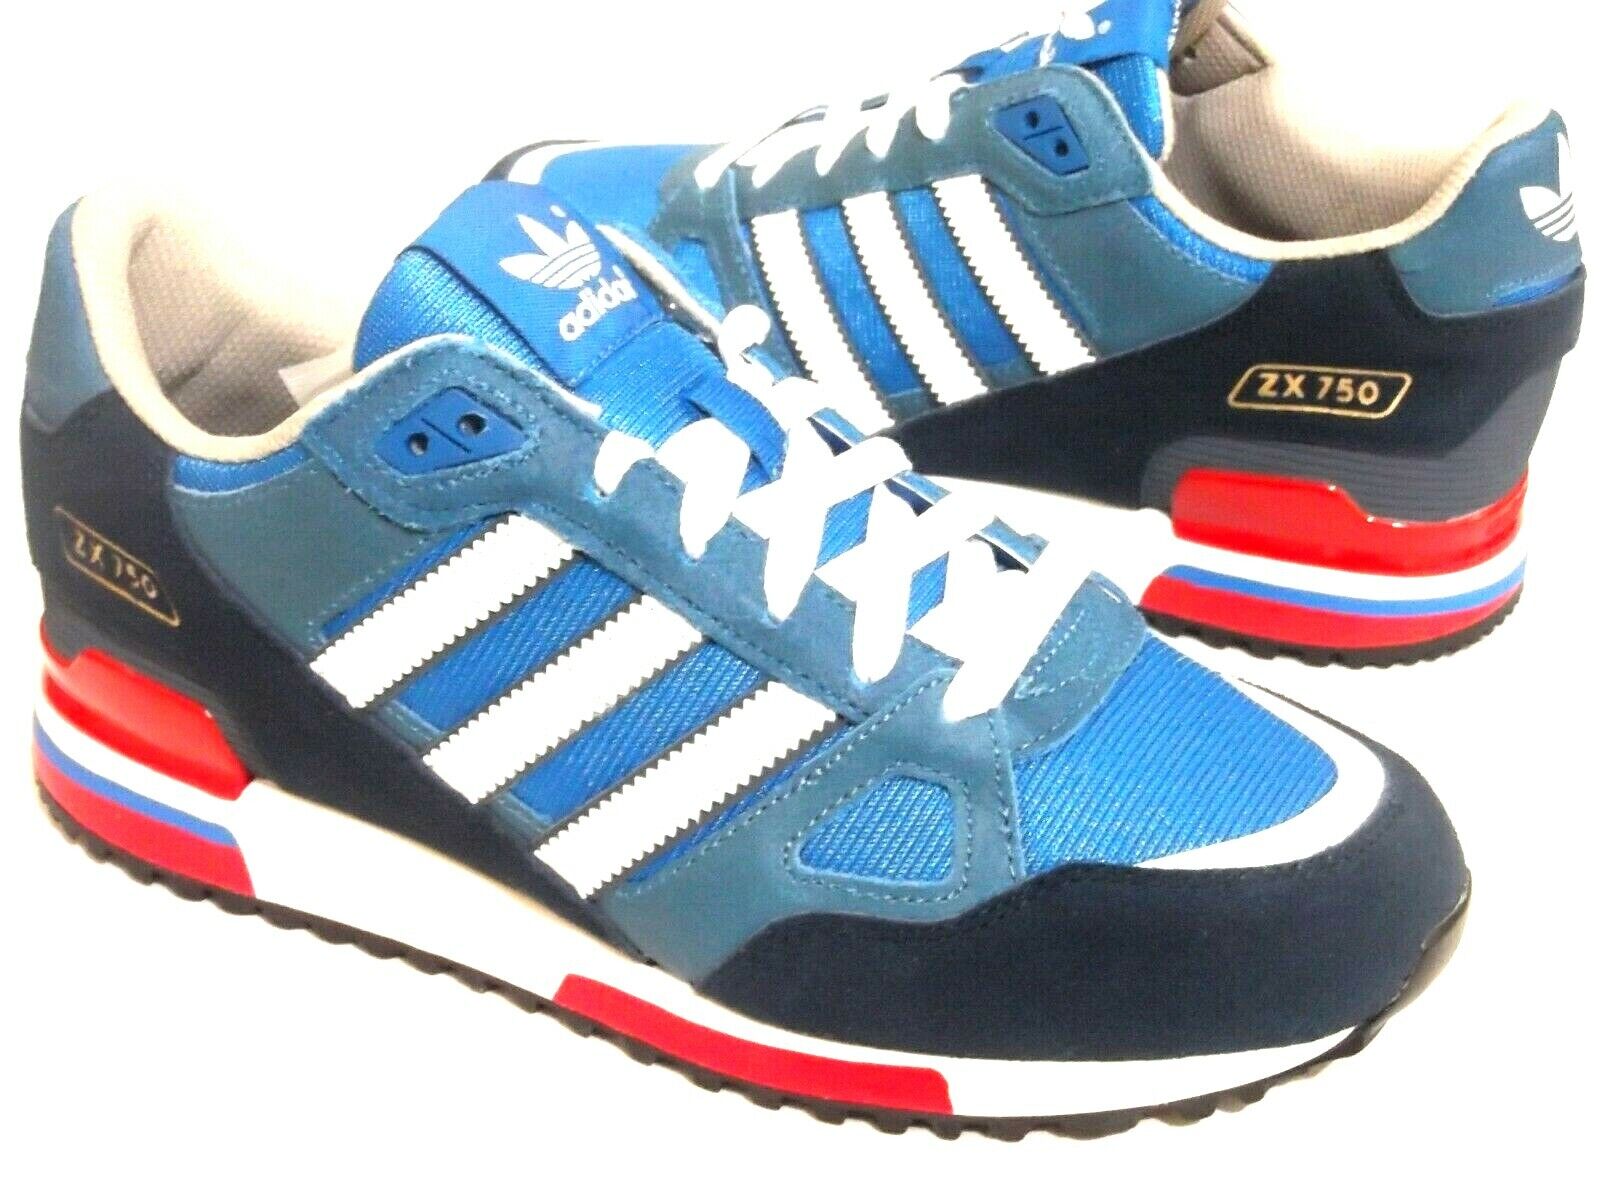 Adidas 750 Originals Mens Shoes Trainers Uk Size 7 to 12 G96718 | eBay